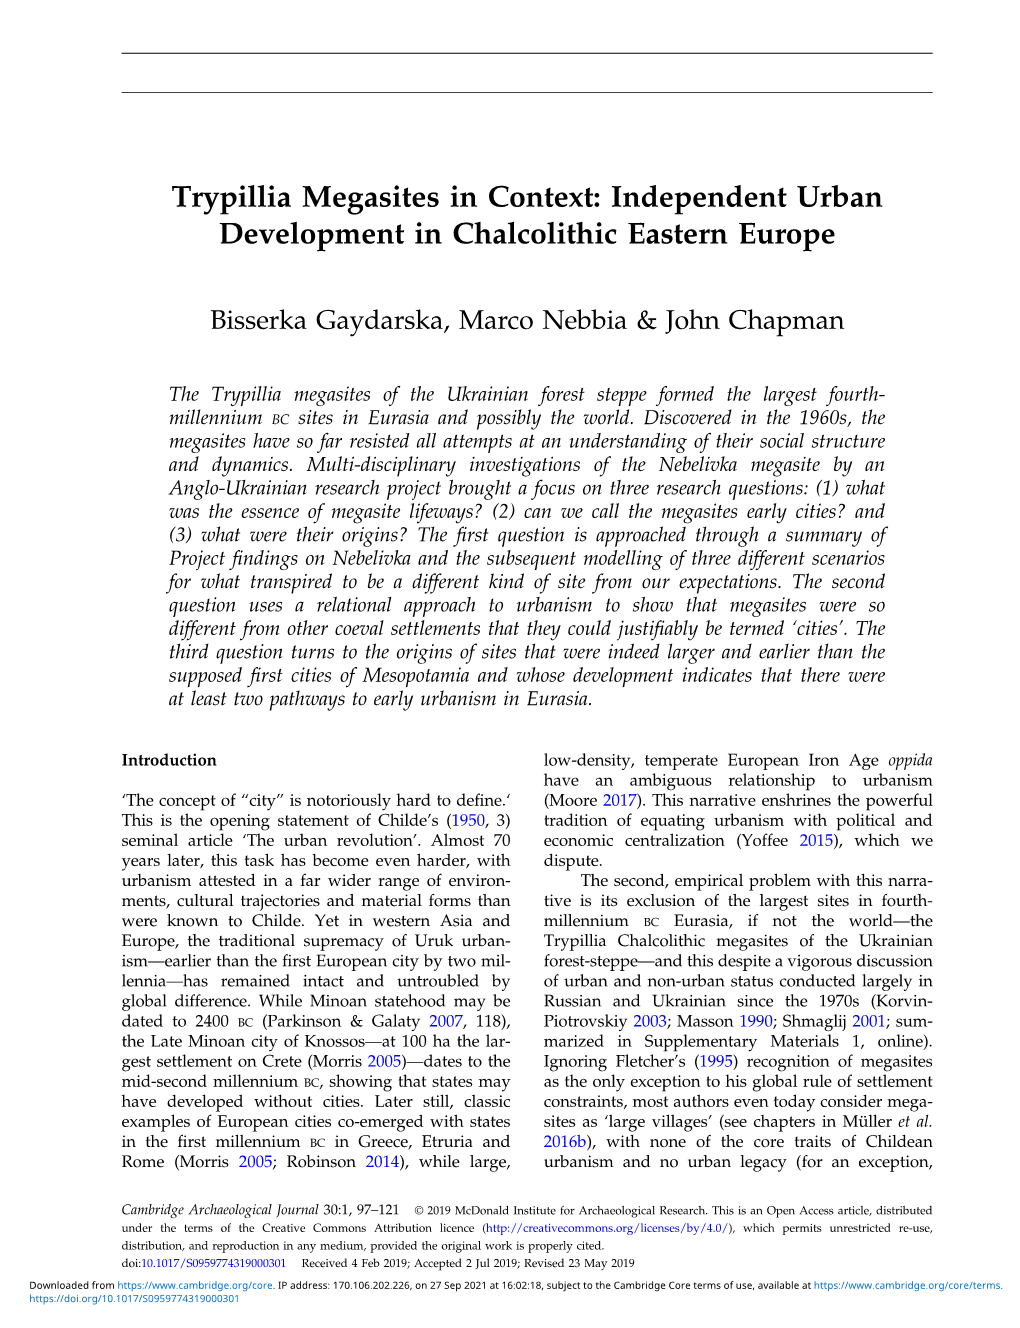 Trypillia Megasites in Context: Independent Urban Development in Chalcolithic Eastern Europe